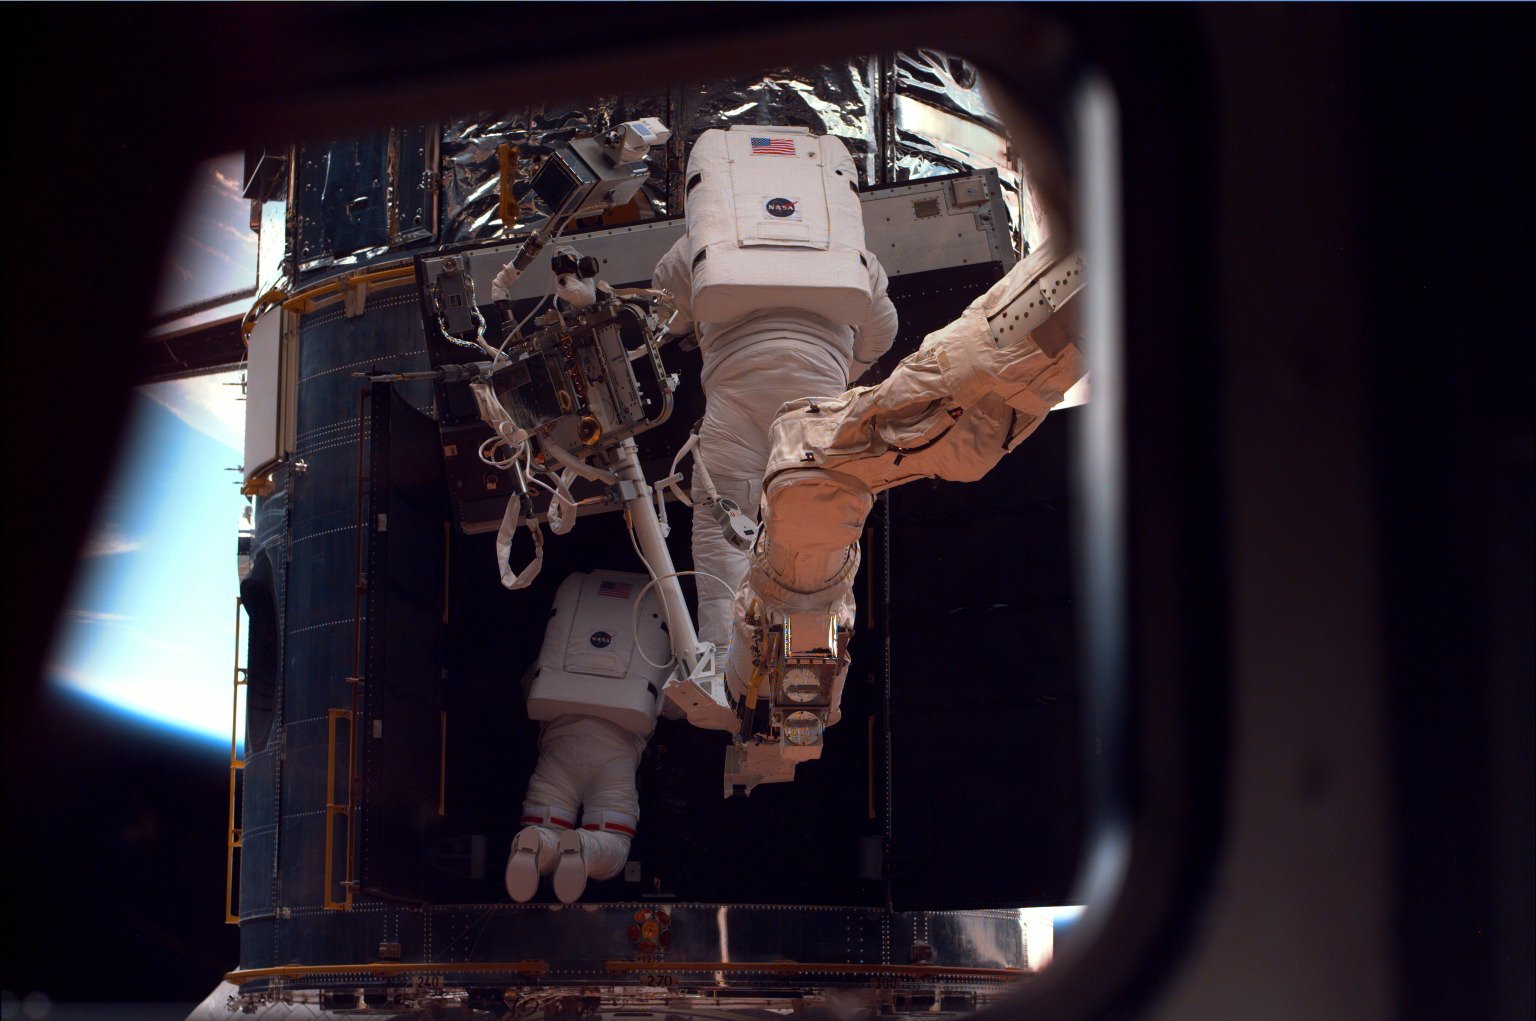 One astronaut perches on the robotic arm and another is only partially visible inside a dark open door on the Hubble Space Telescope. Both astronauts are seen from behind, with Hubble looming before them.